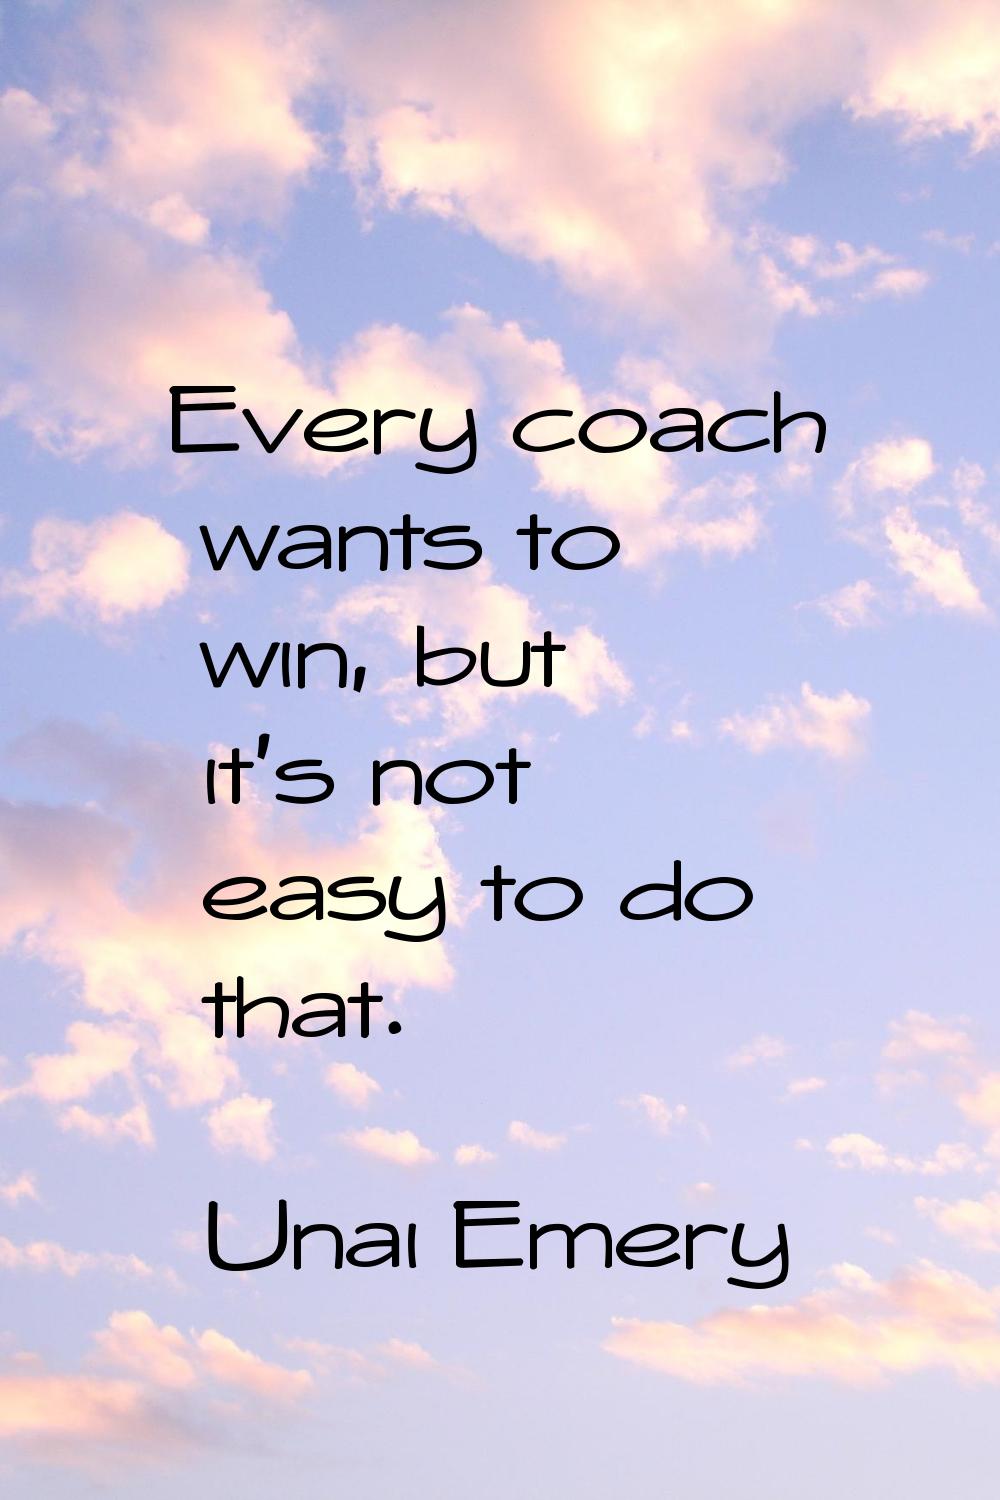 Every coach wants to win, but it's not easy to do that.